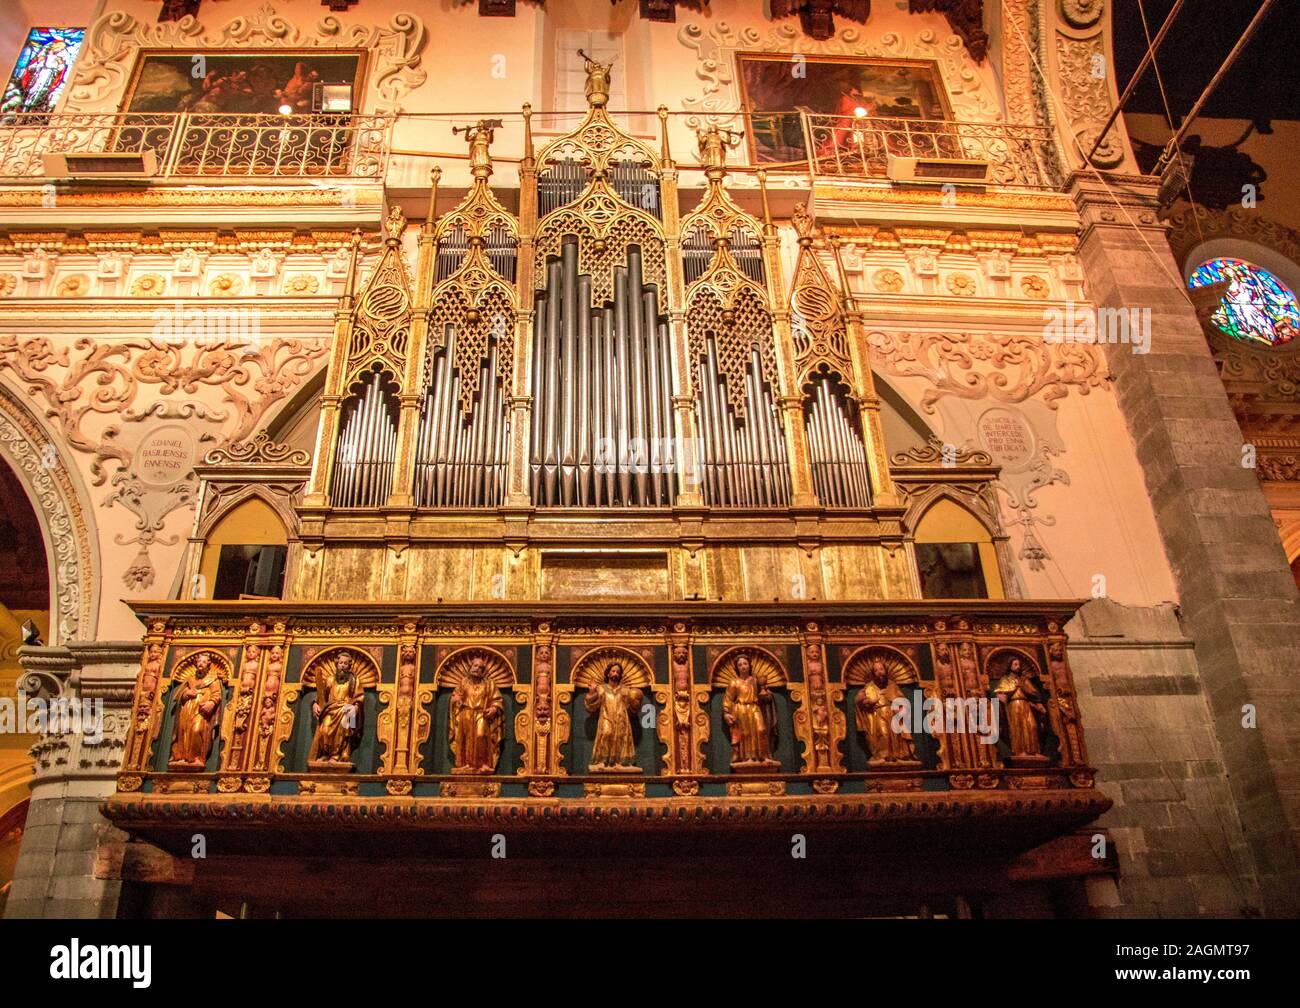 A huge and vintage organ located in a church in the town of Enna, Sicily. Stock Photo